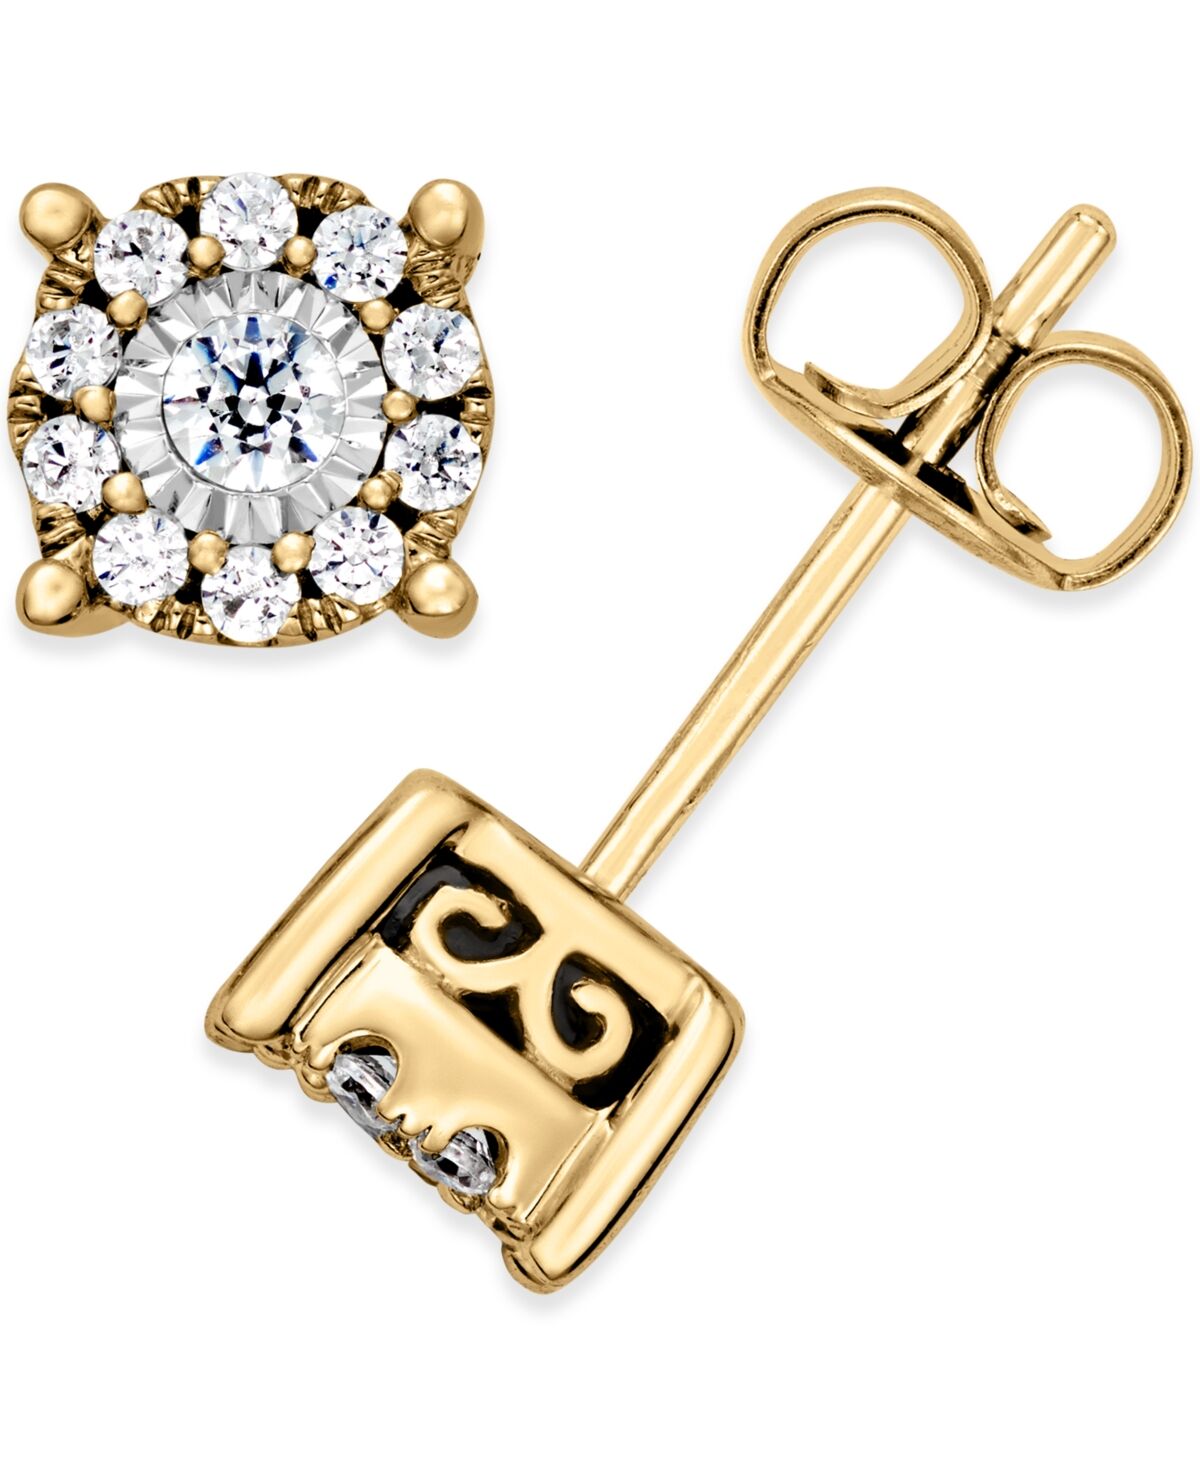 Macy's Diamond Stud Earrings (1/3 ct. t.w.) in 14K White, Yellow or Rose Gold - Yellow Gold